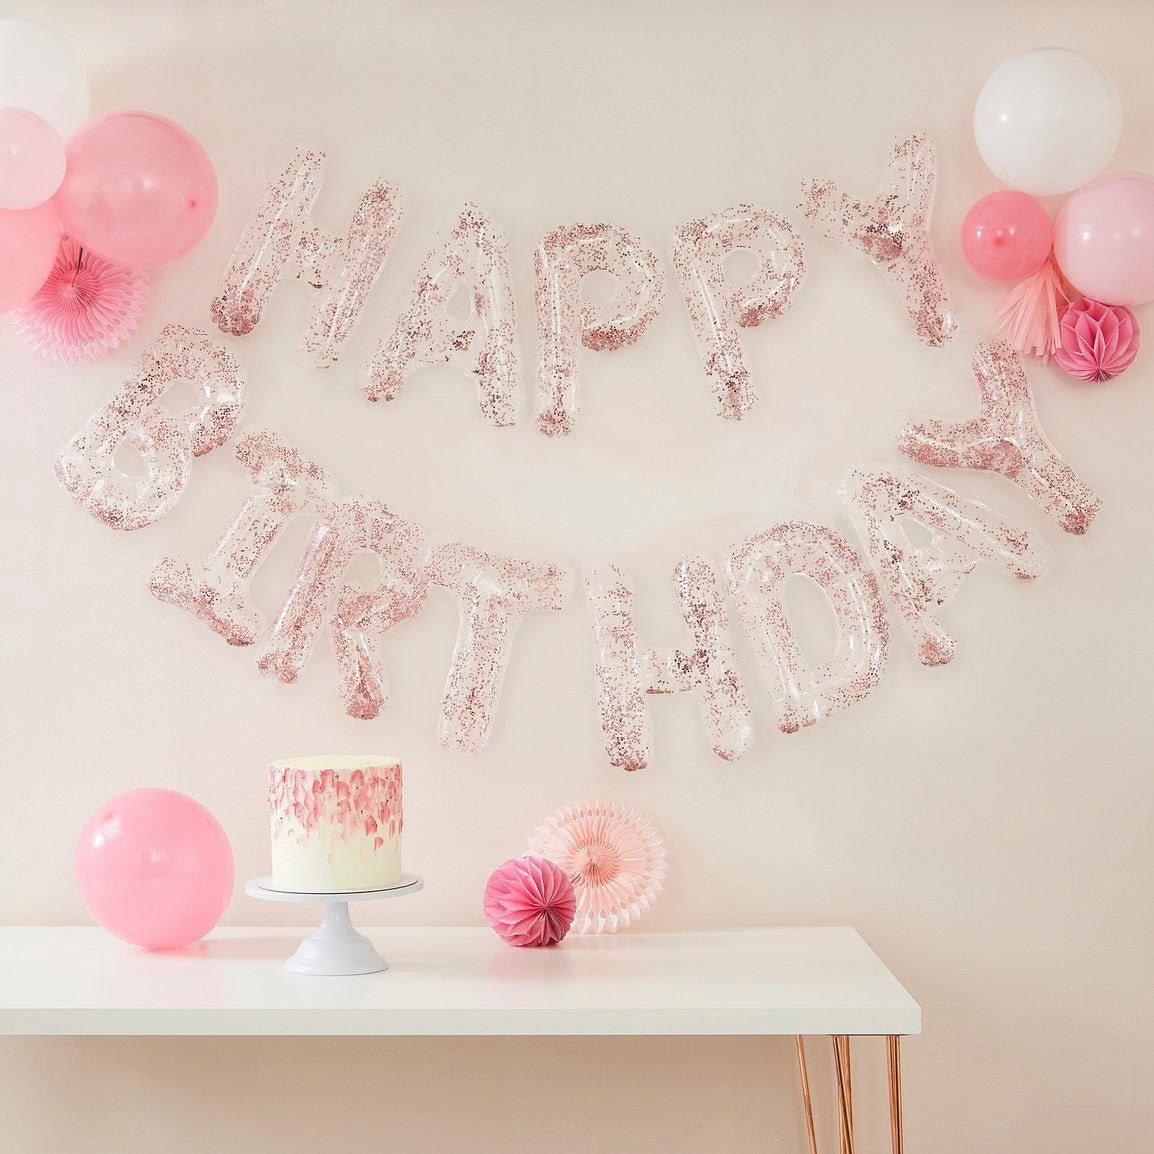 ROSE GOLD CONFETTI FILLED HAPPY BIRTHDAY BALLOON BUNTING